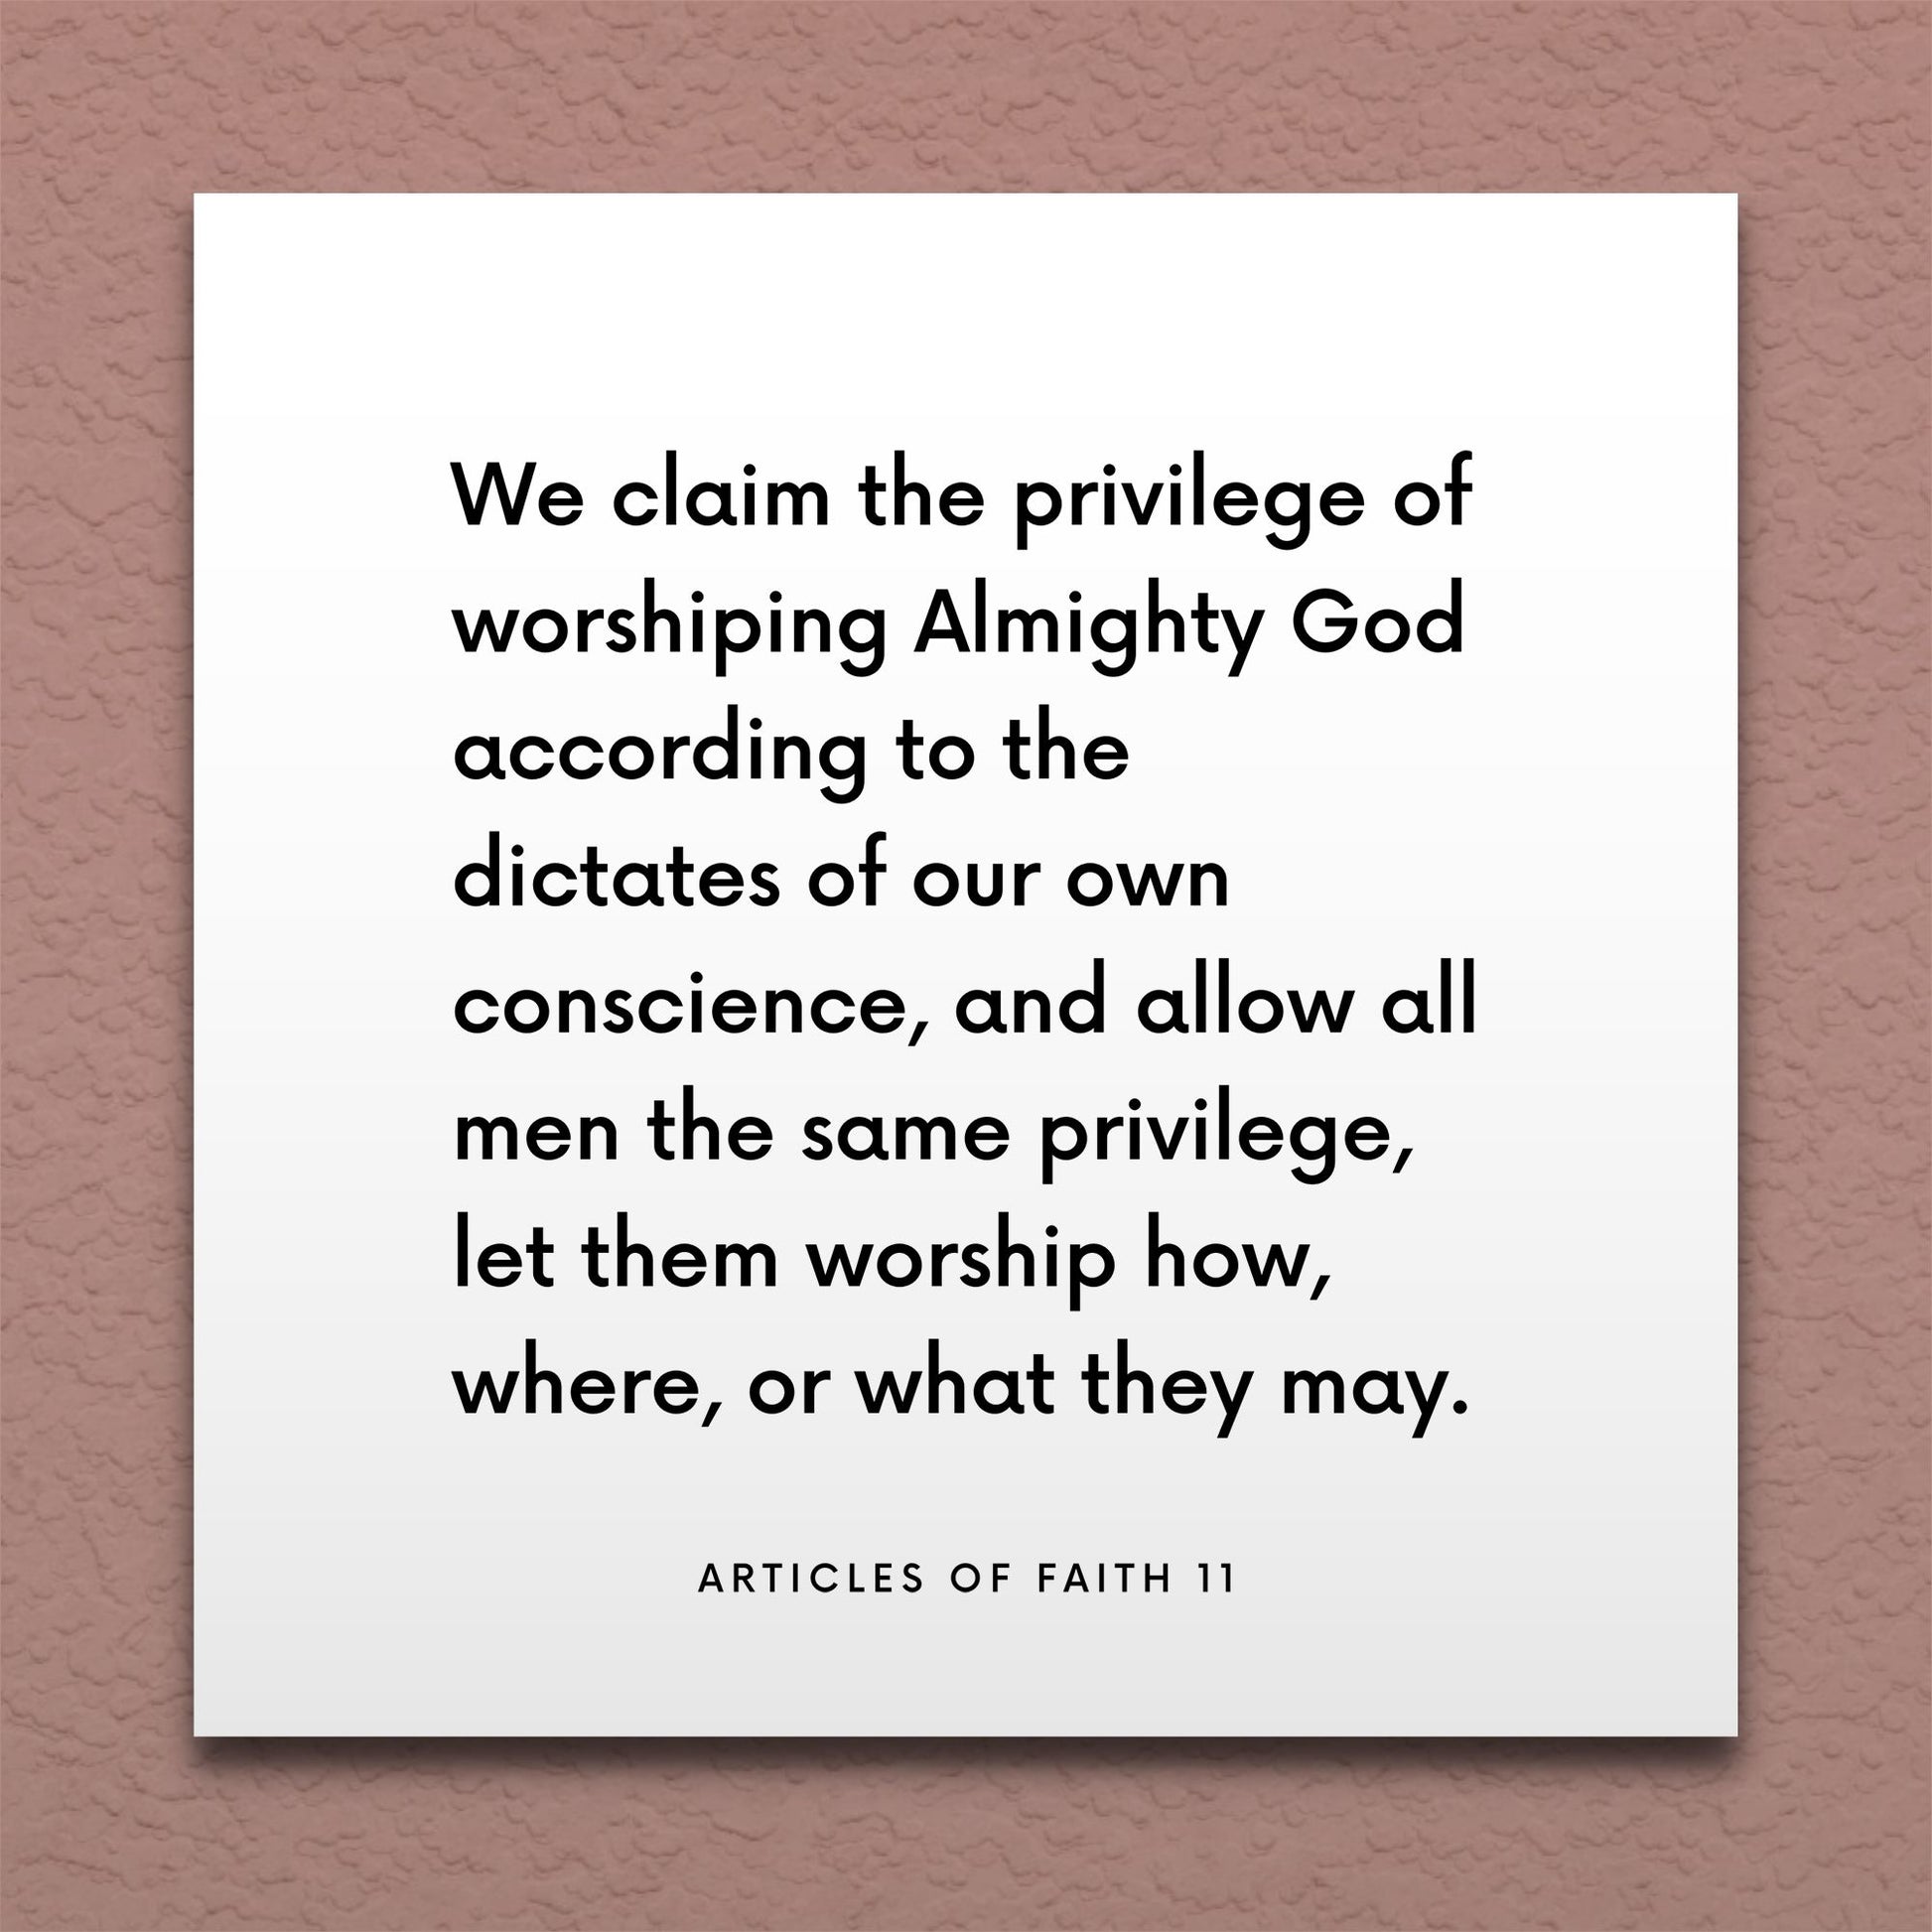 Wall-mounted scripture tile for Articles of Faith 11 - "We claim the privilege of worshiping Almighty God"